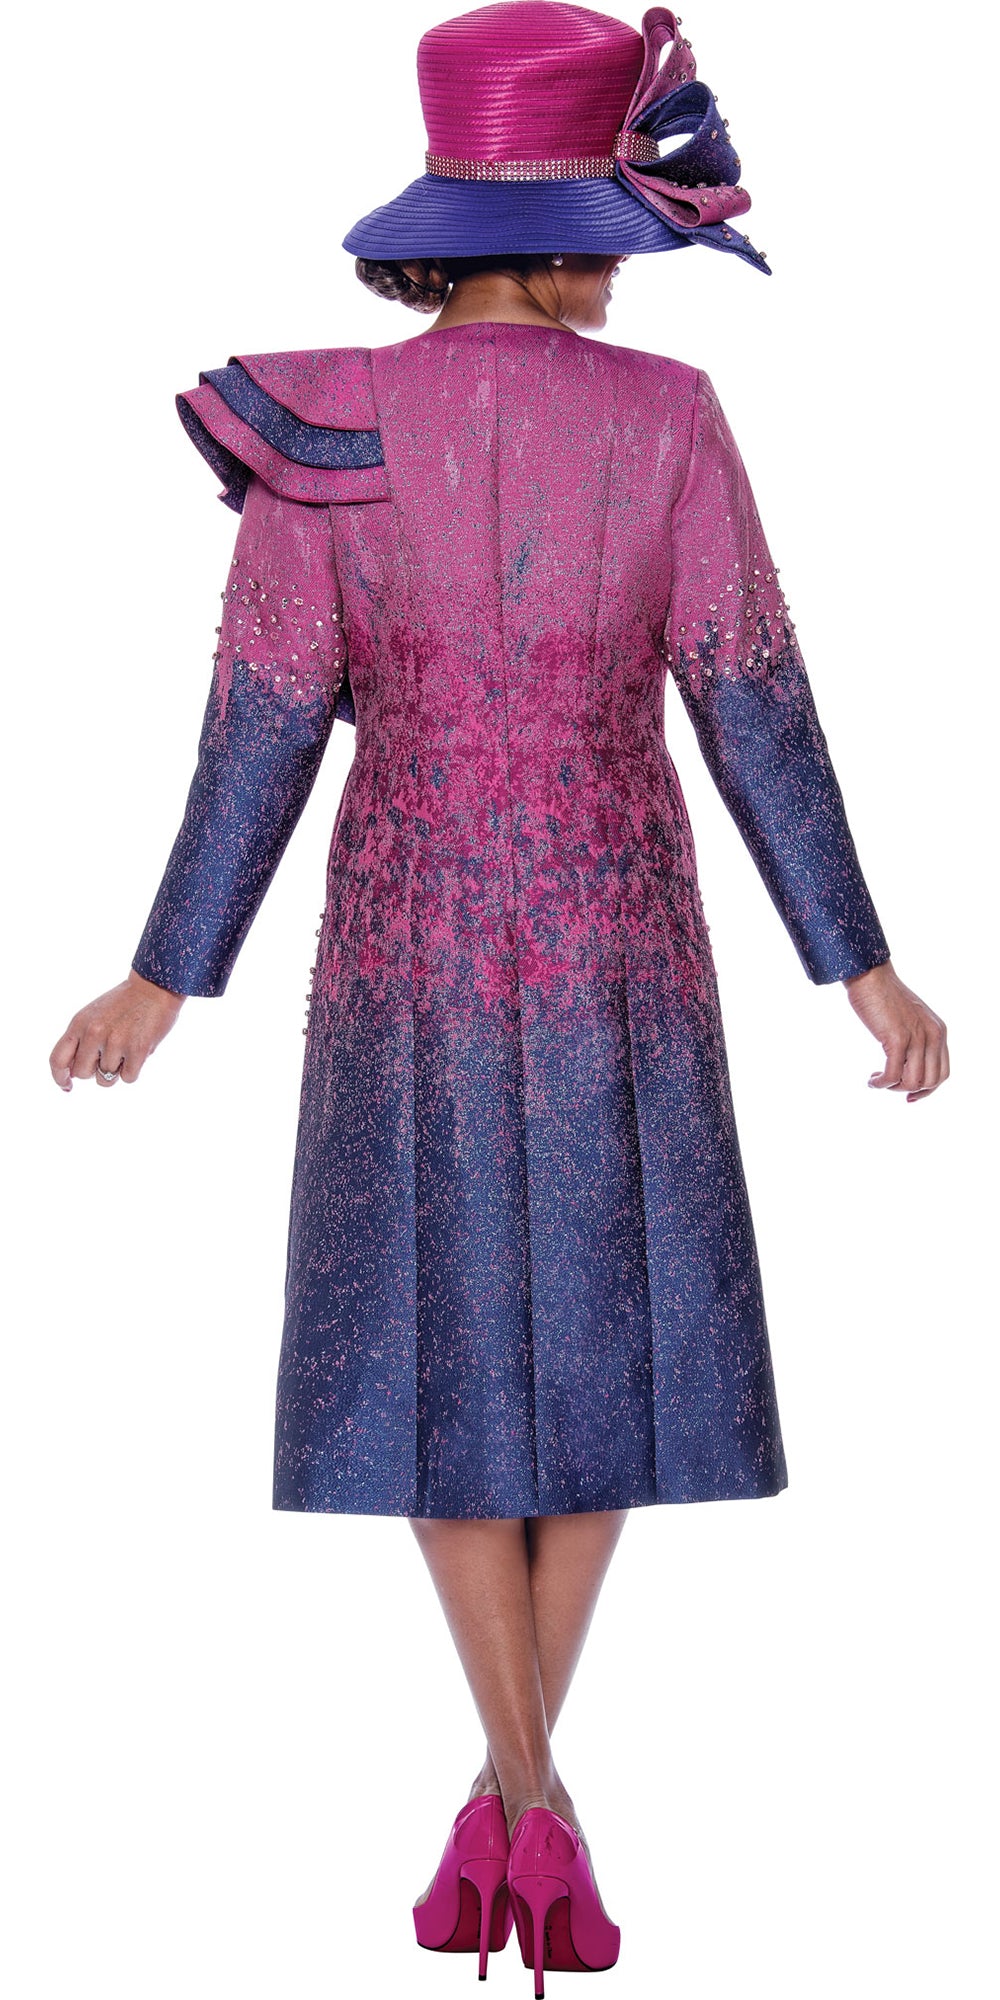 Divine Queen 2332 - Purple - 2 PC Embellished Jacquard Jacket and Dress